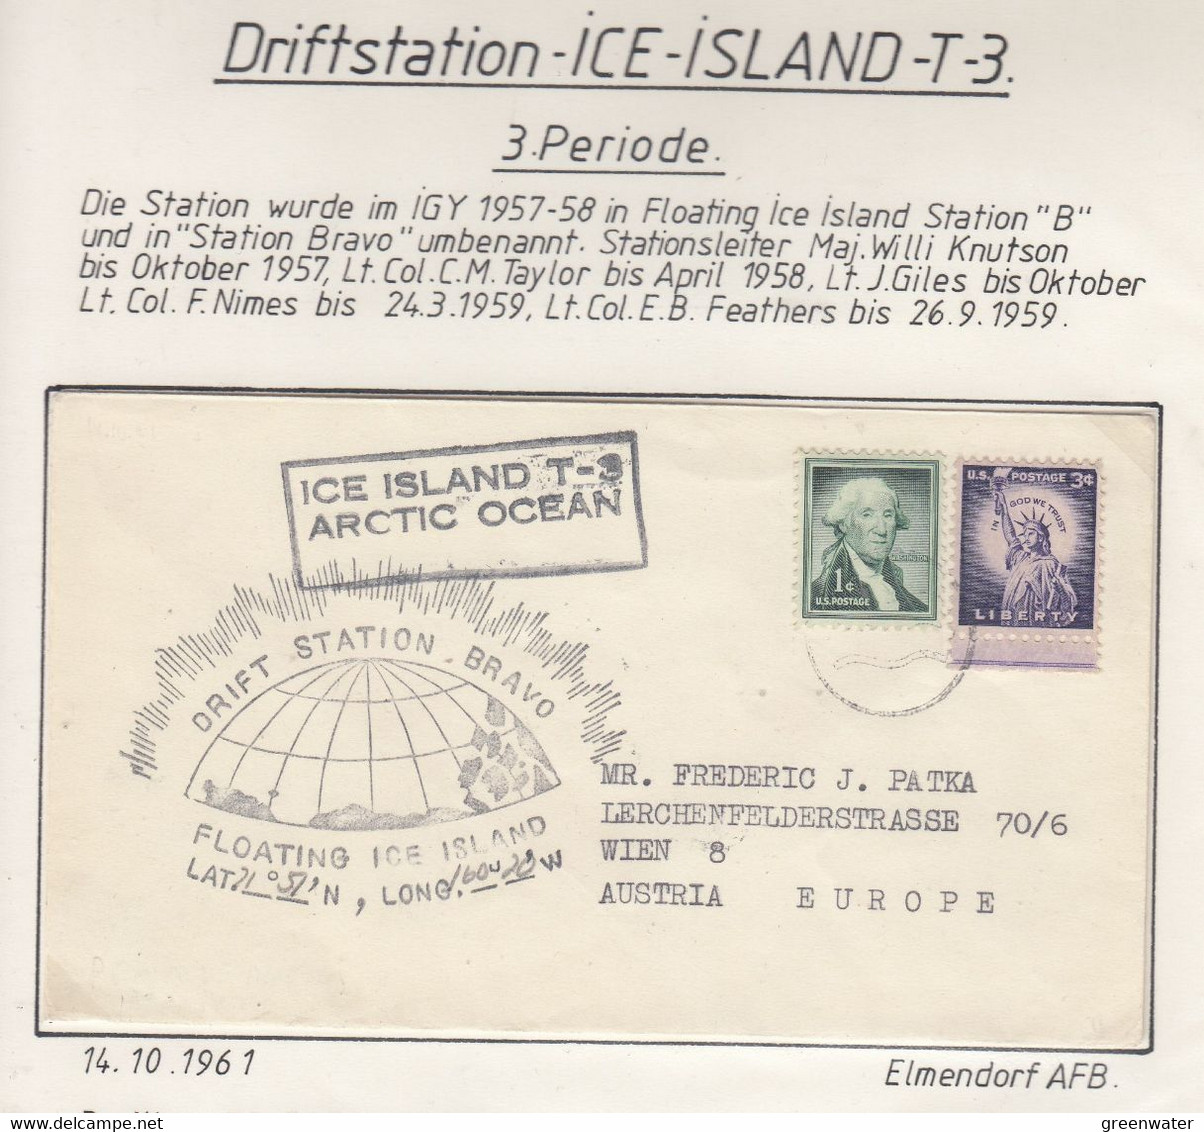 USA Driftstation ICE-ISLAND T-3 Cover Ca Ice Island T-3 Arctic Ocean Station Bravo Ca 14.10.61 Periode 3 (DR106) - Scientific Stations & Arctic Drifting Stations